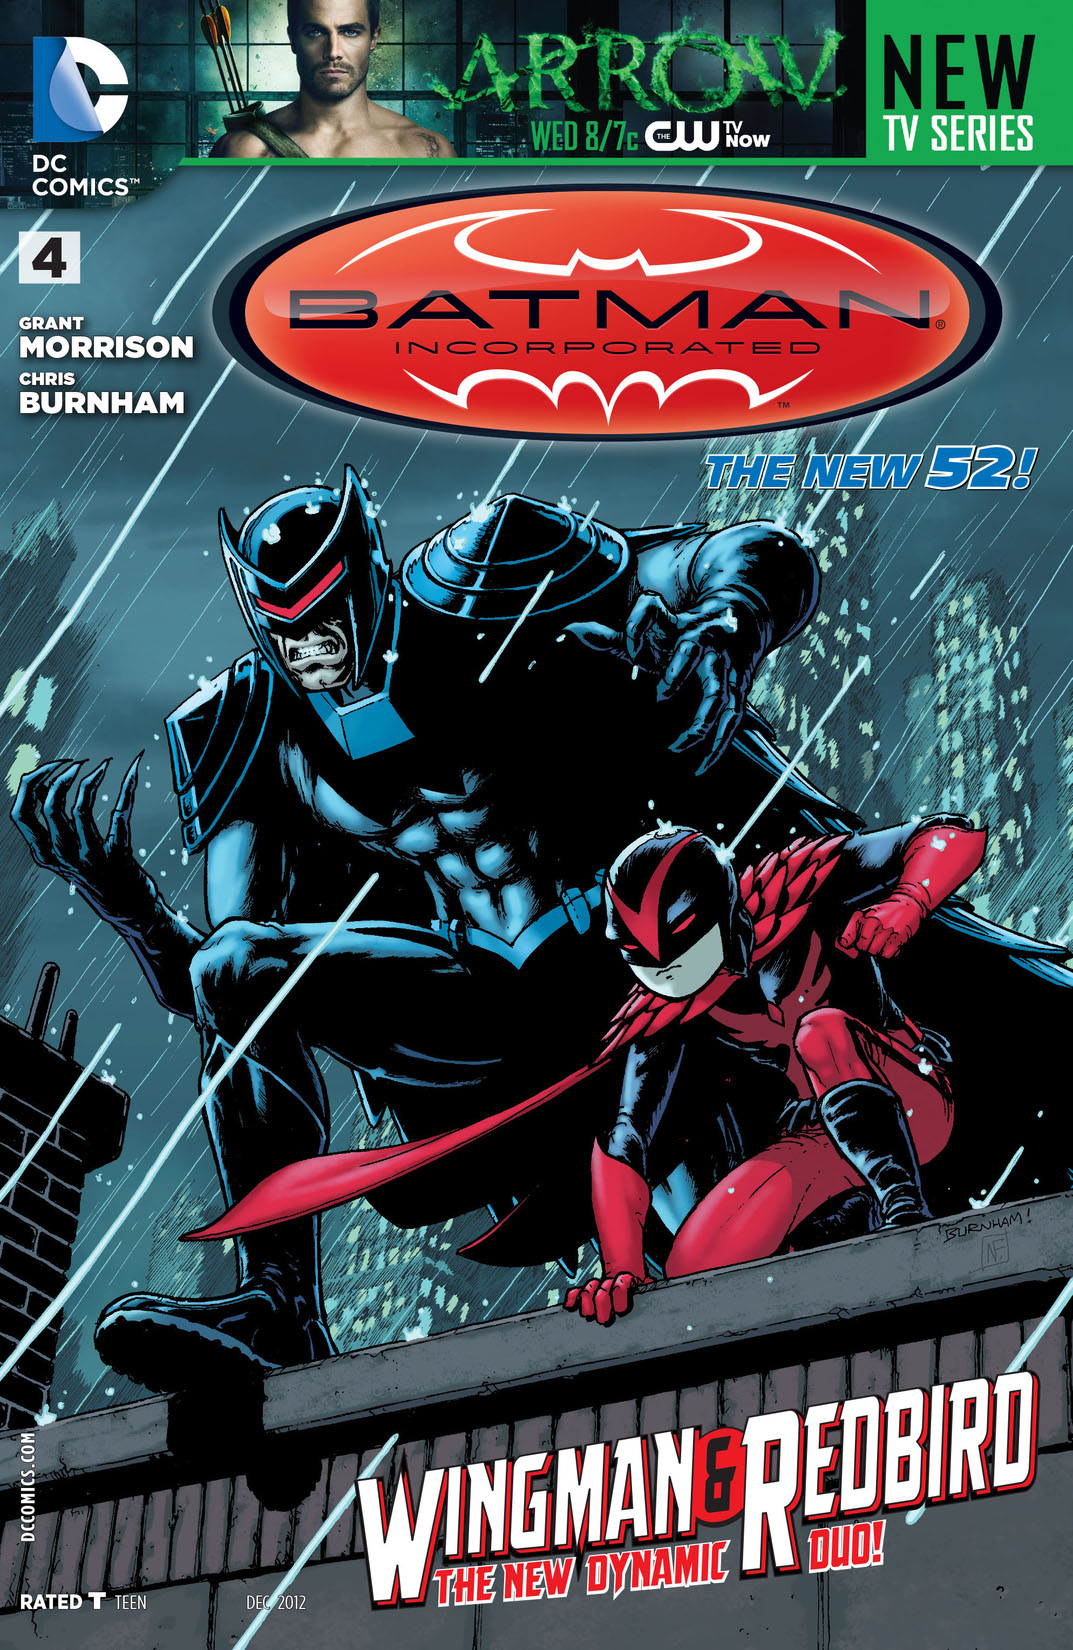 Batman Incorporated (2012-) #4 preview images